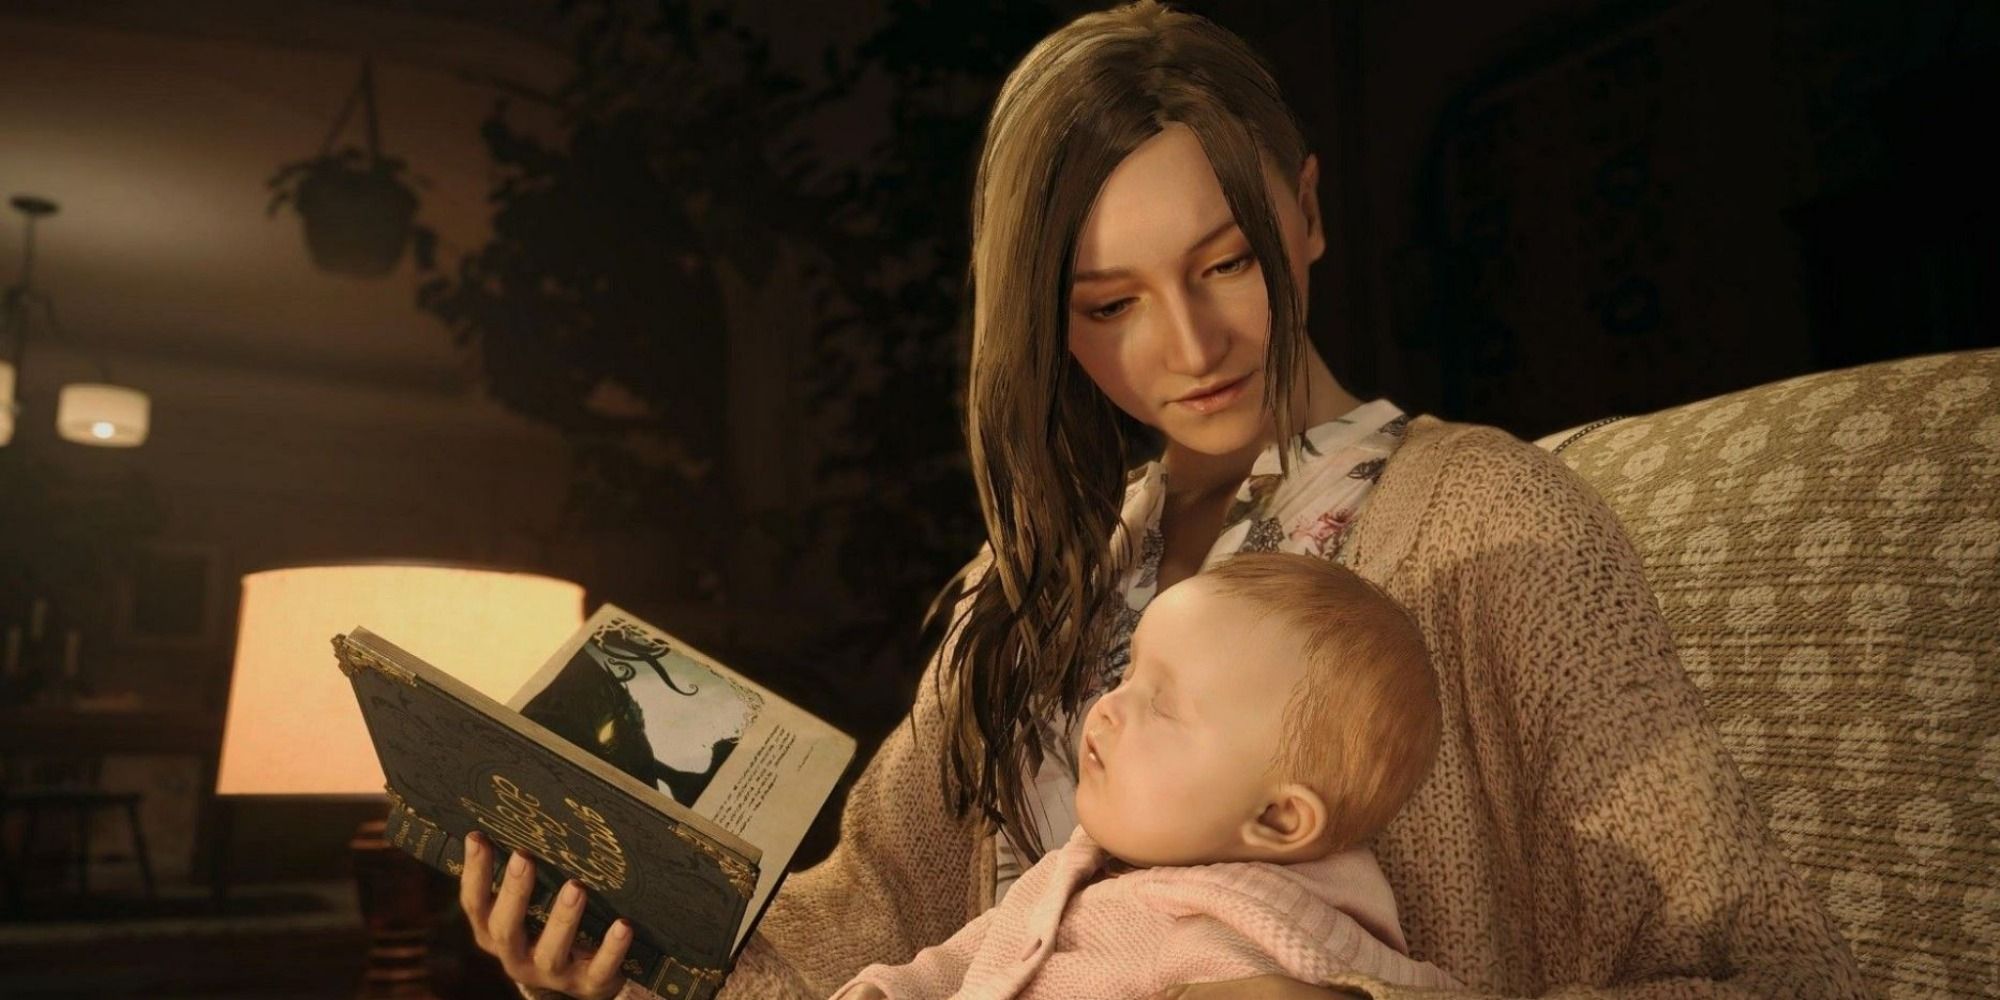 Mia Winters holds a book in one hand and baby Rose in another in a living room